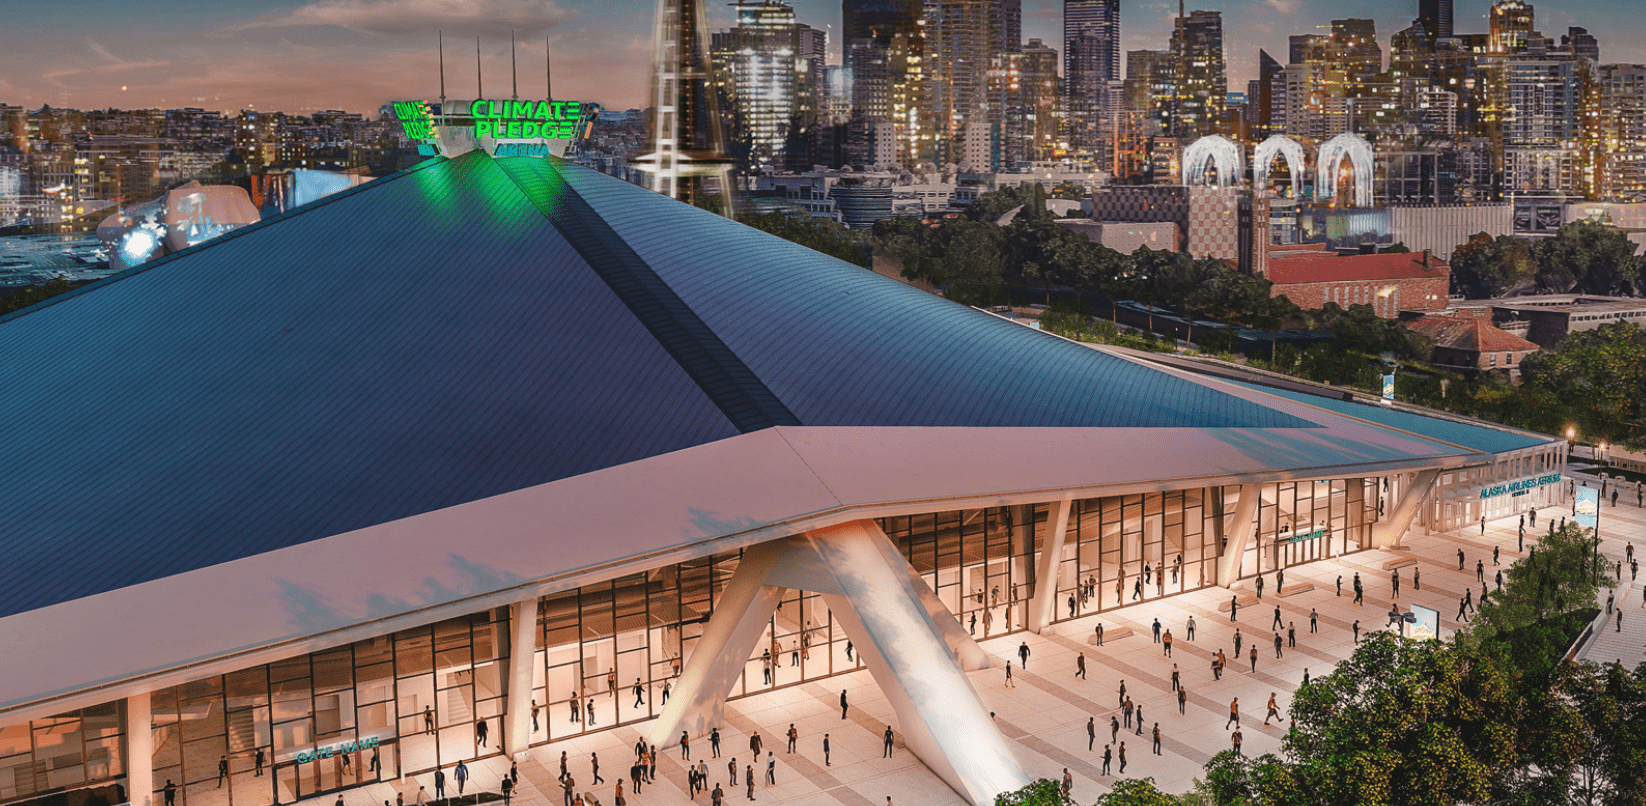 A rendering of the new Climate Pledge Arena at the Seattle Center. The arena is the main part of the photo, with the City of Seattle skyline visible in the background in the evening.